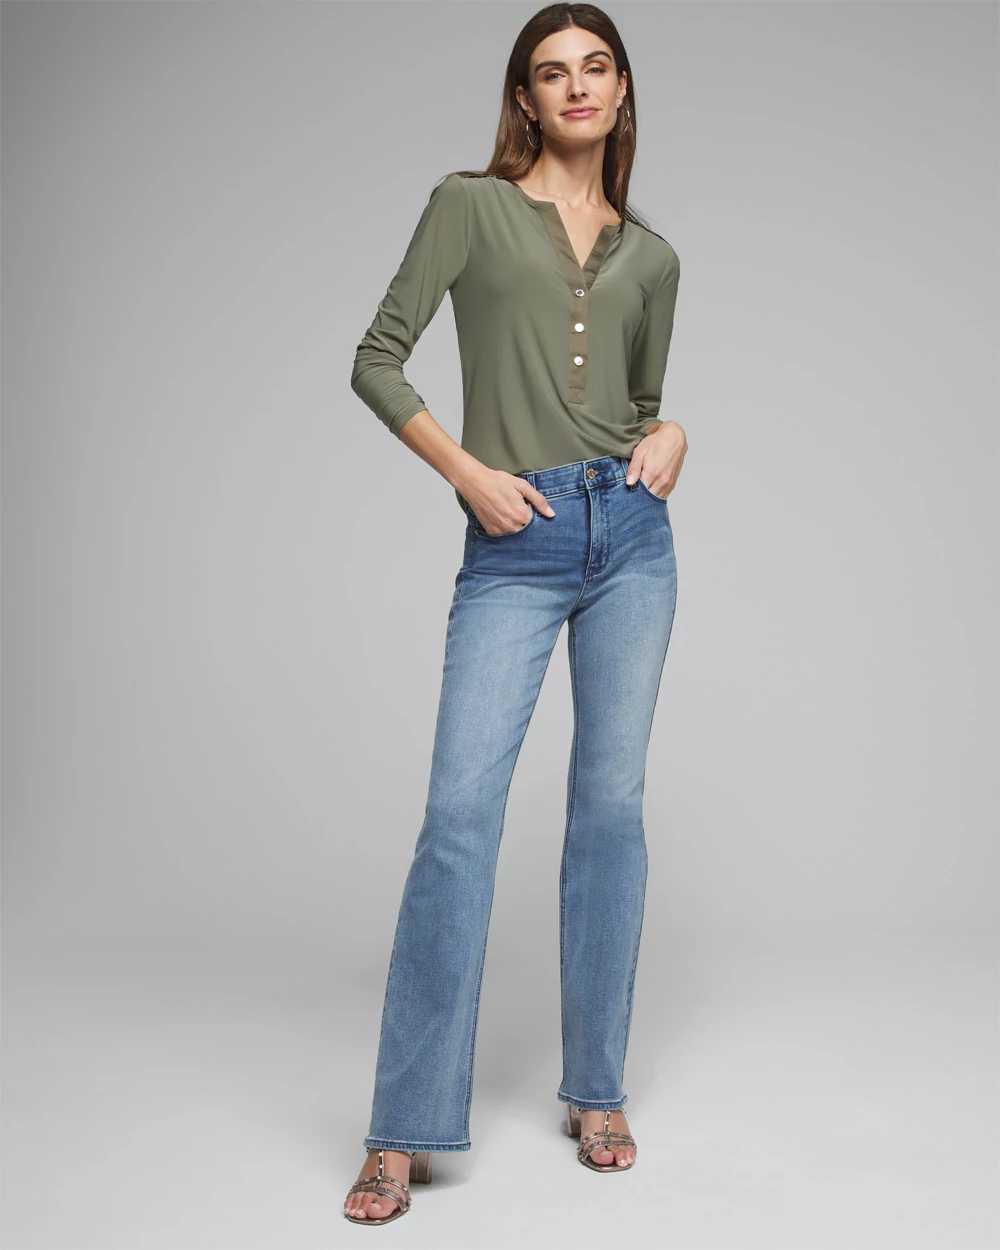 Outlet WHBM Long Sleeve Utility Tee click to view larger image.